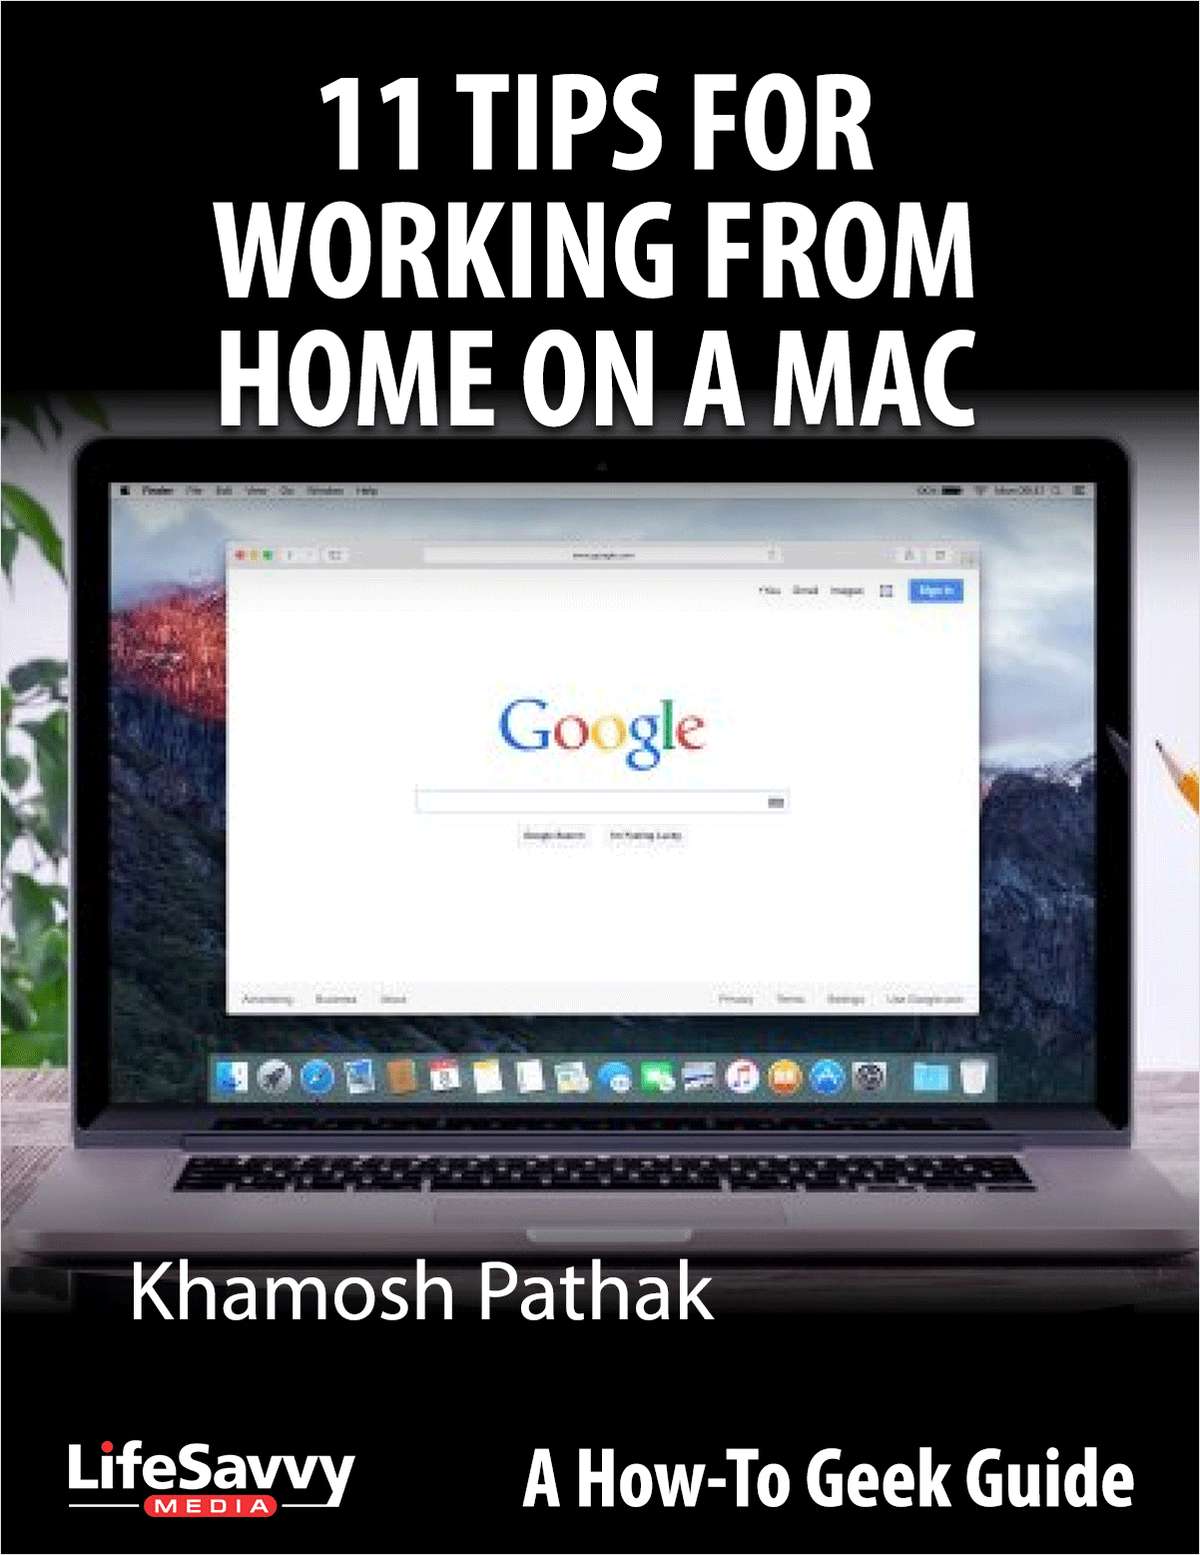 11 Tips for Working from Home on a Mac